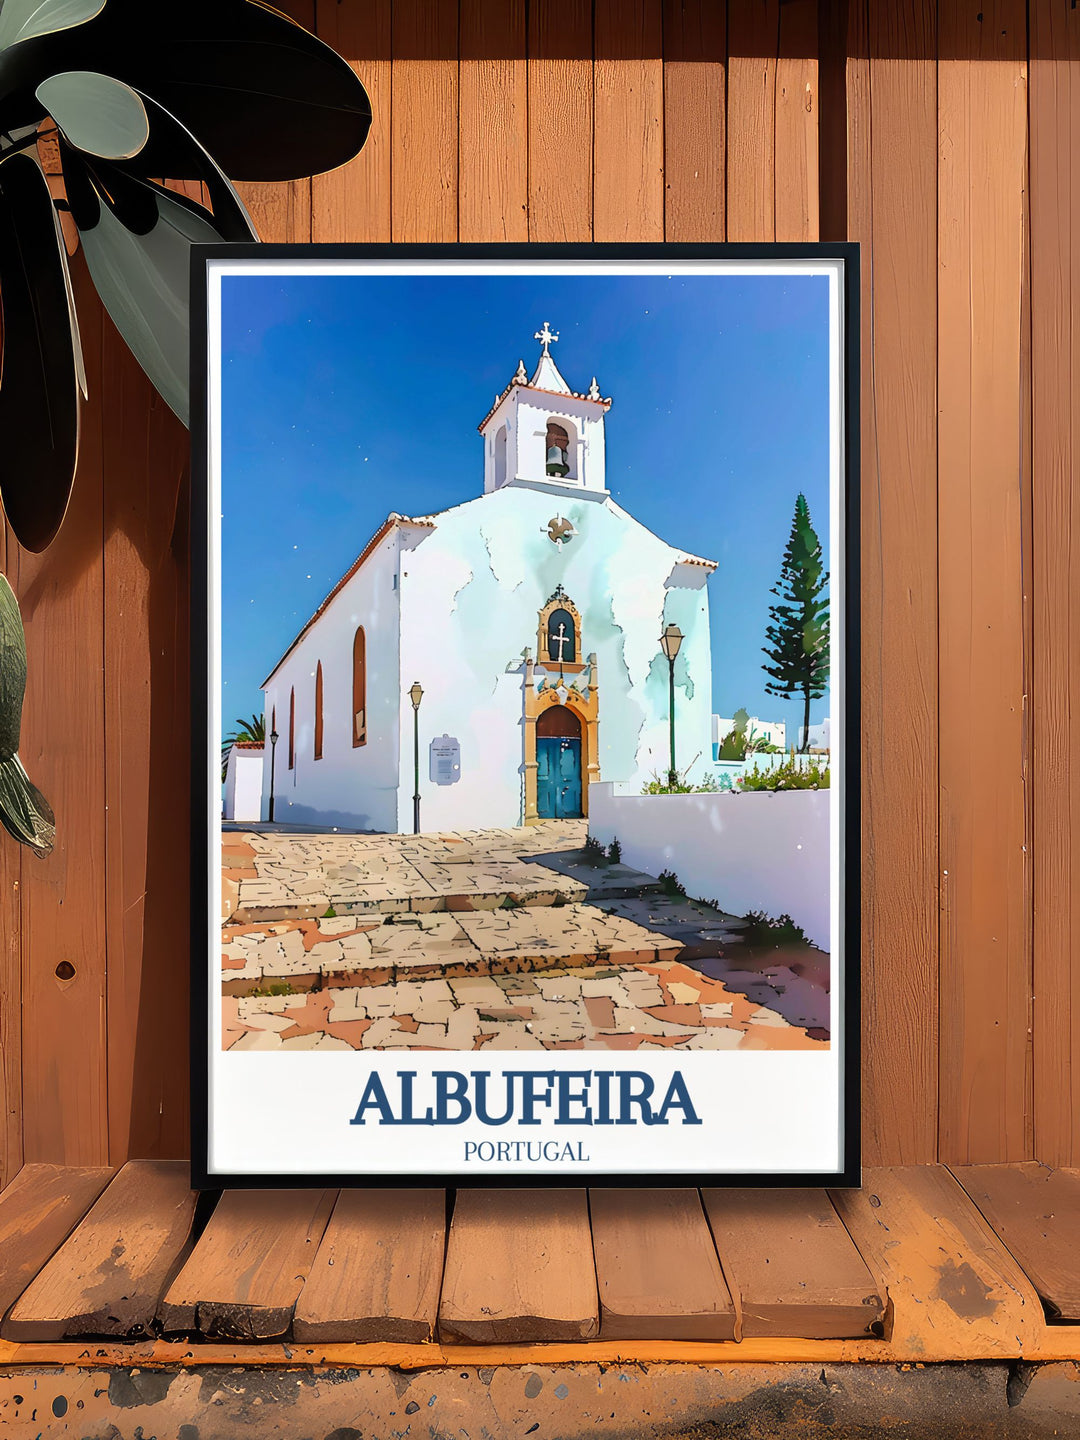 High quality print of St Anna Church in Albufeira, Portugal, capturing the intricate architecture and serene surroundings of this beloved landmark.